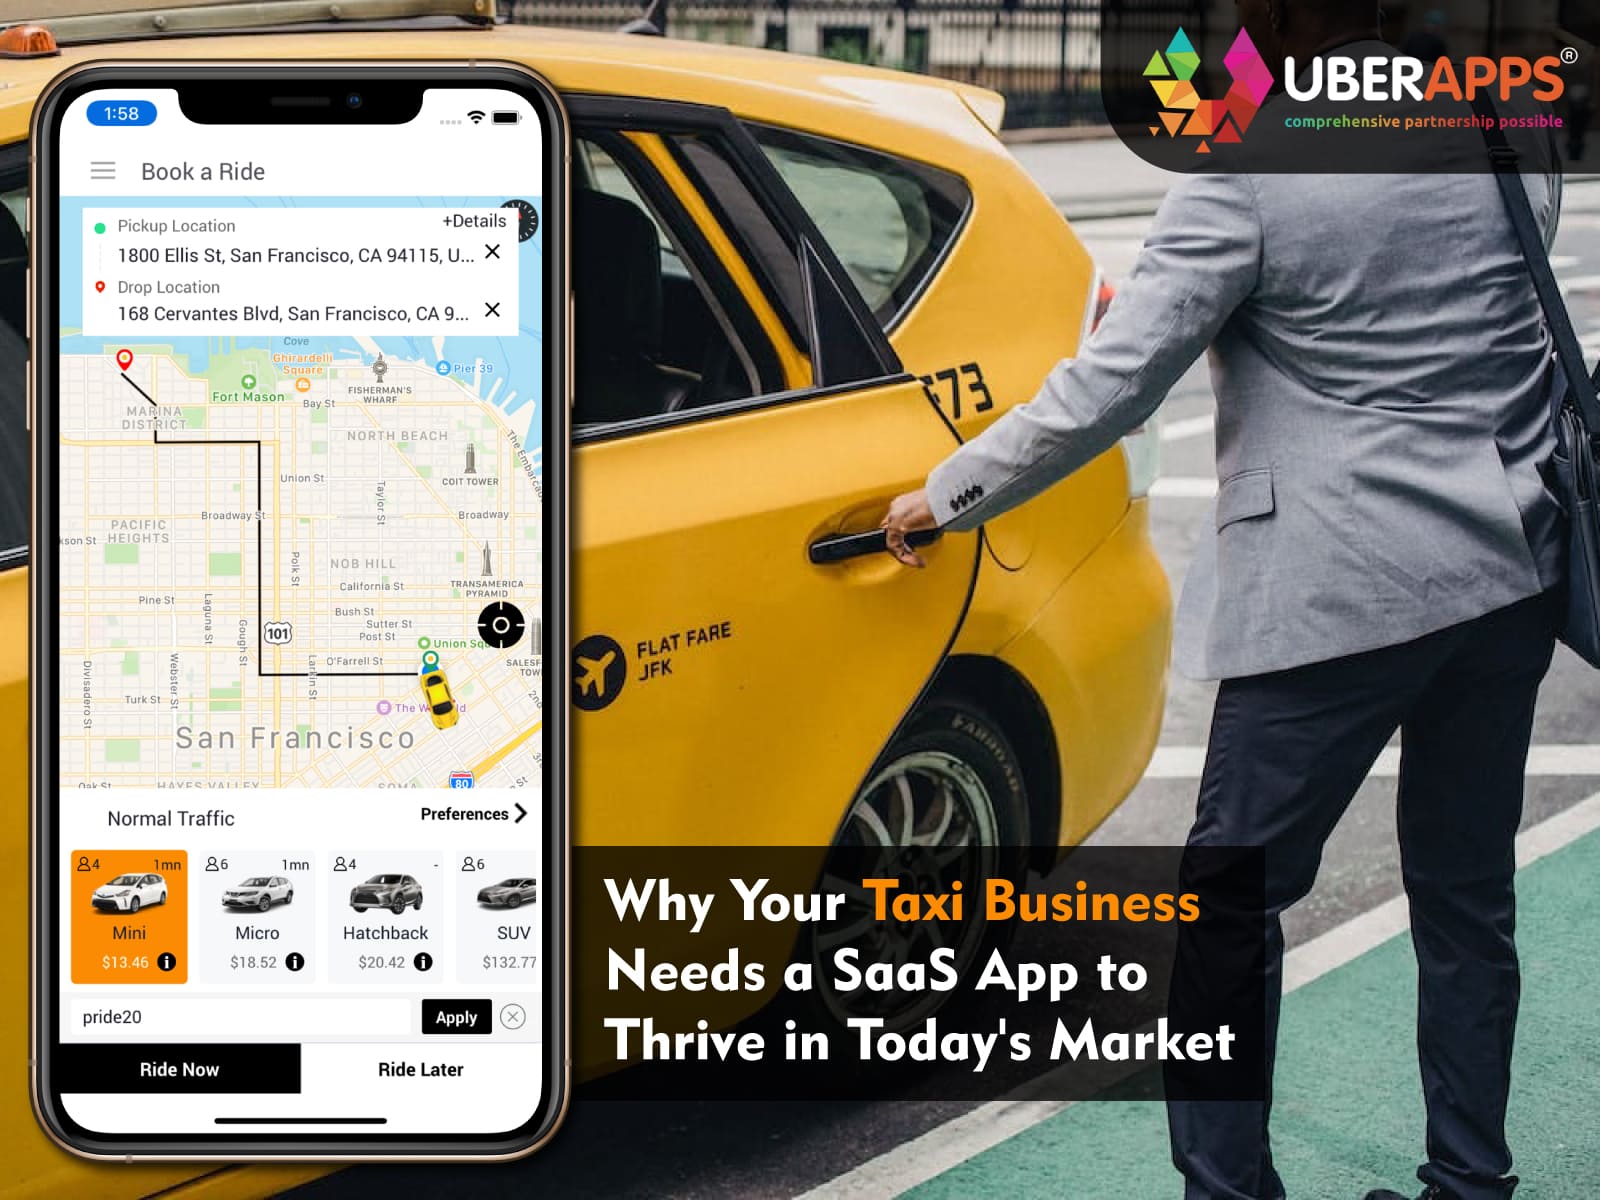 Why Your Taxi Business Needs a SaaS App to Thrive in Today's Market